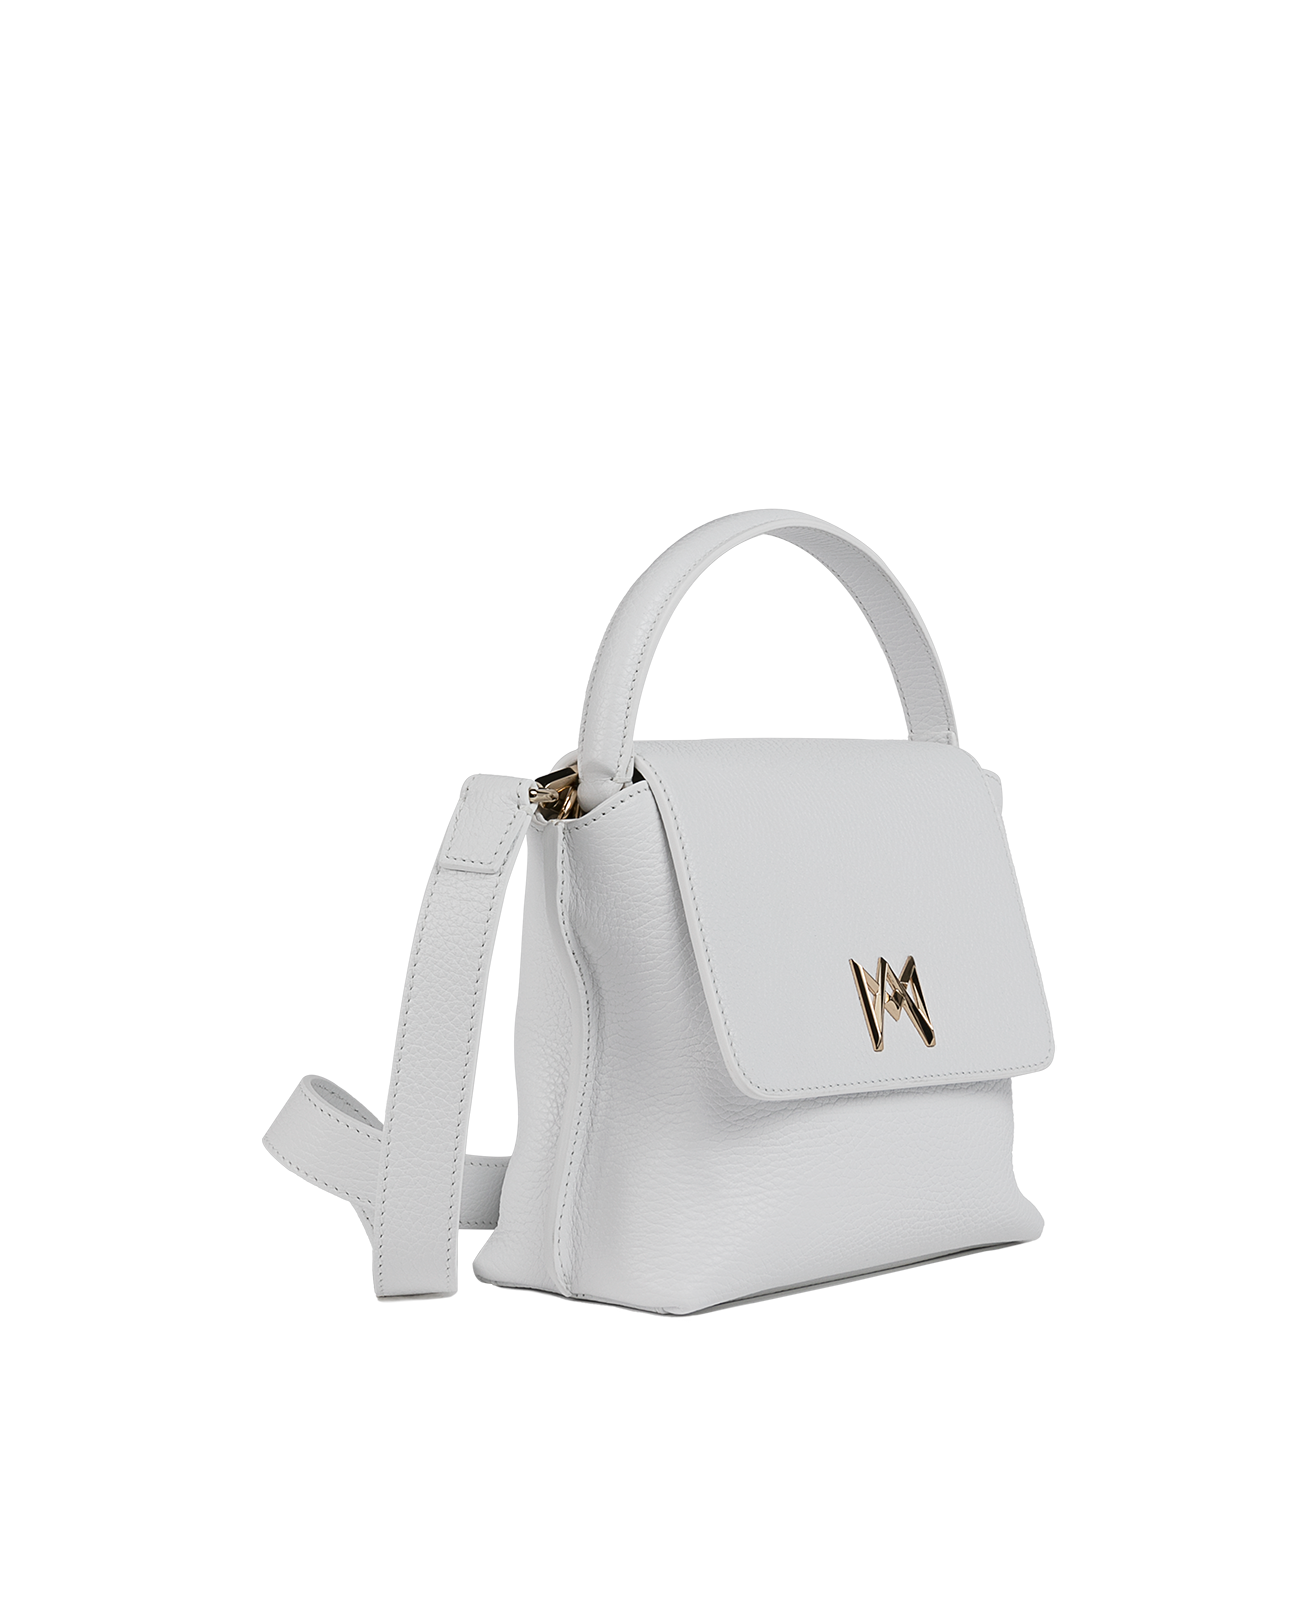 Cross-body bag in Italian full-grain leather, semi-aniline calf Italian leather with detachable shoulder strap.Three compartments, zip pocket in the back compartment. Magnetic flap closure with logo. Color: White. Size:Medium